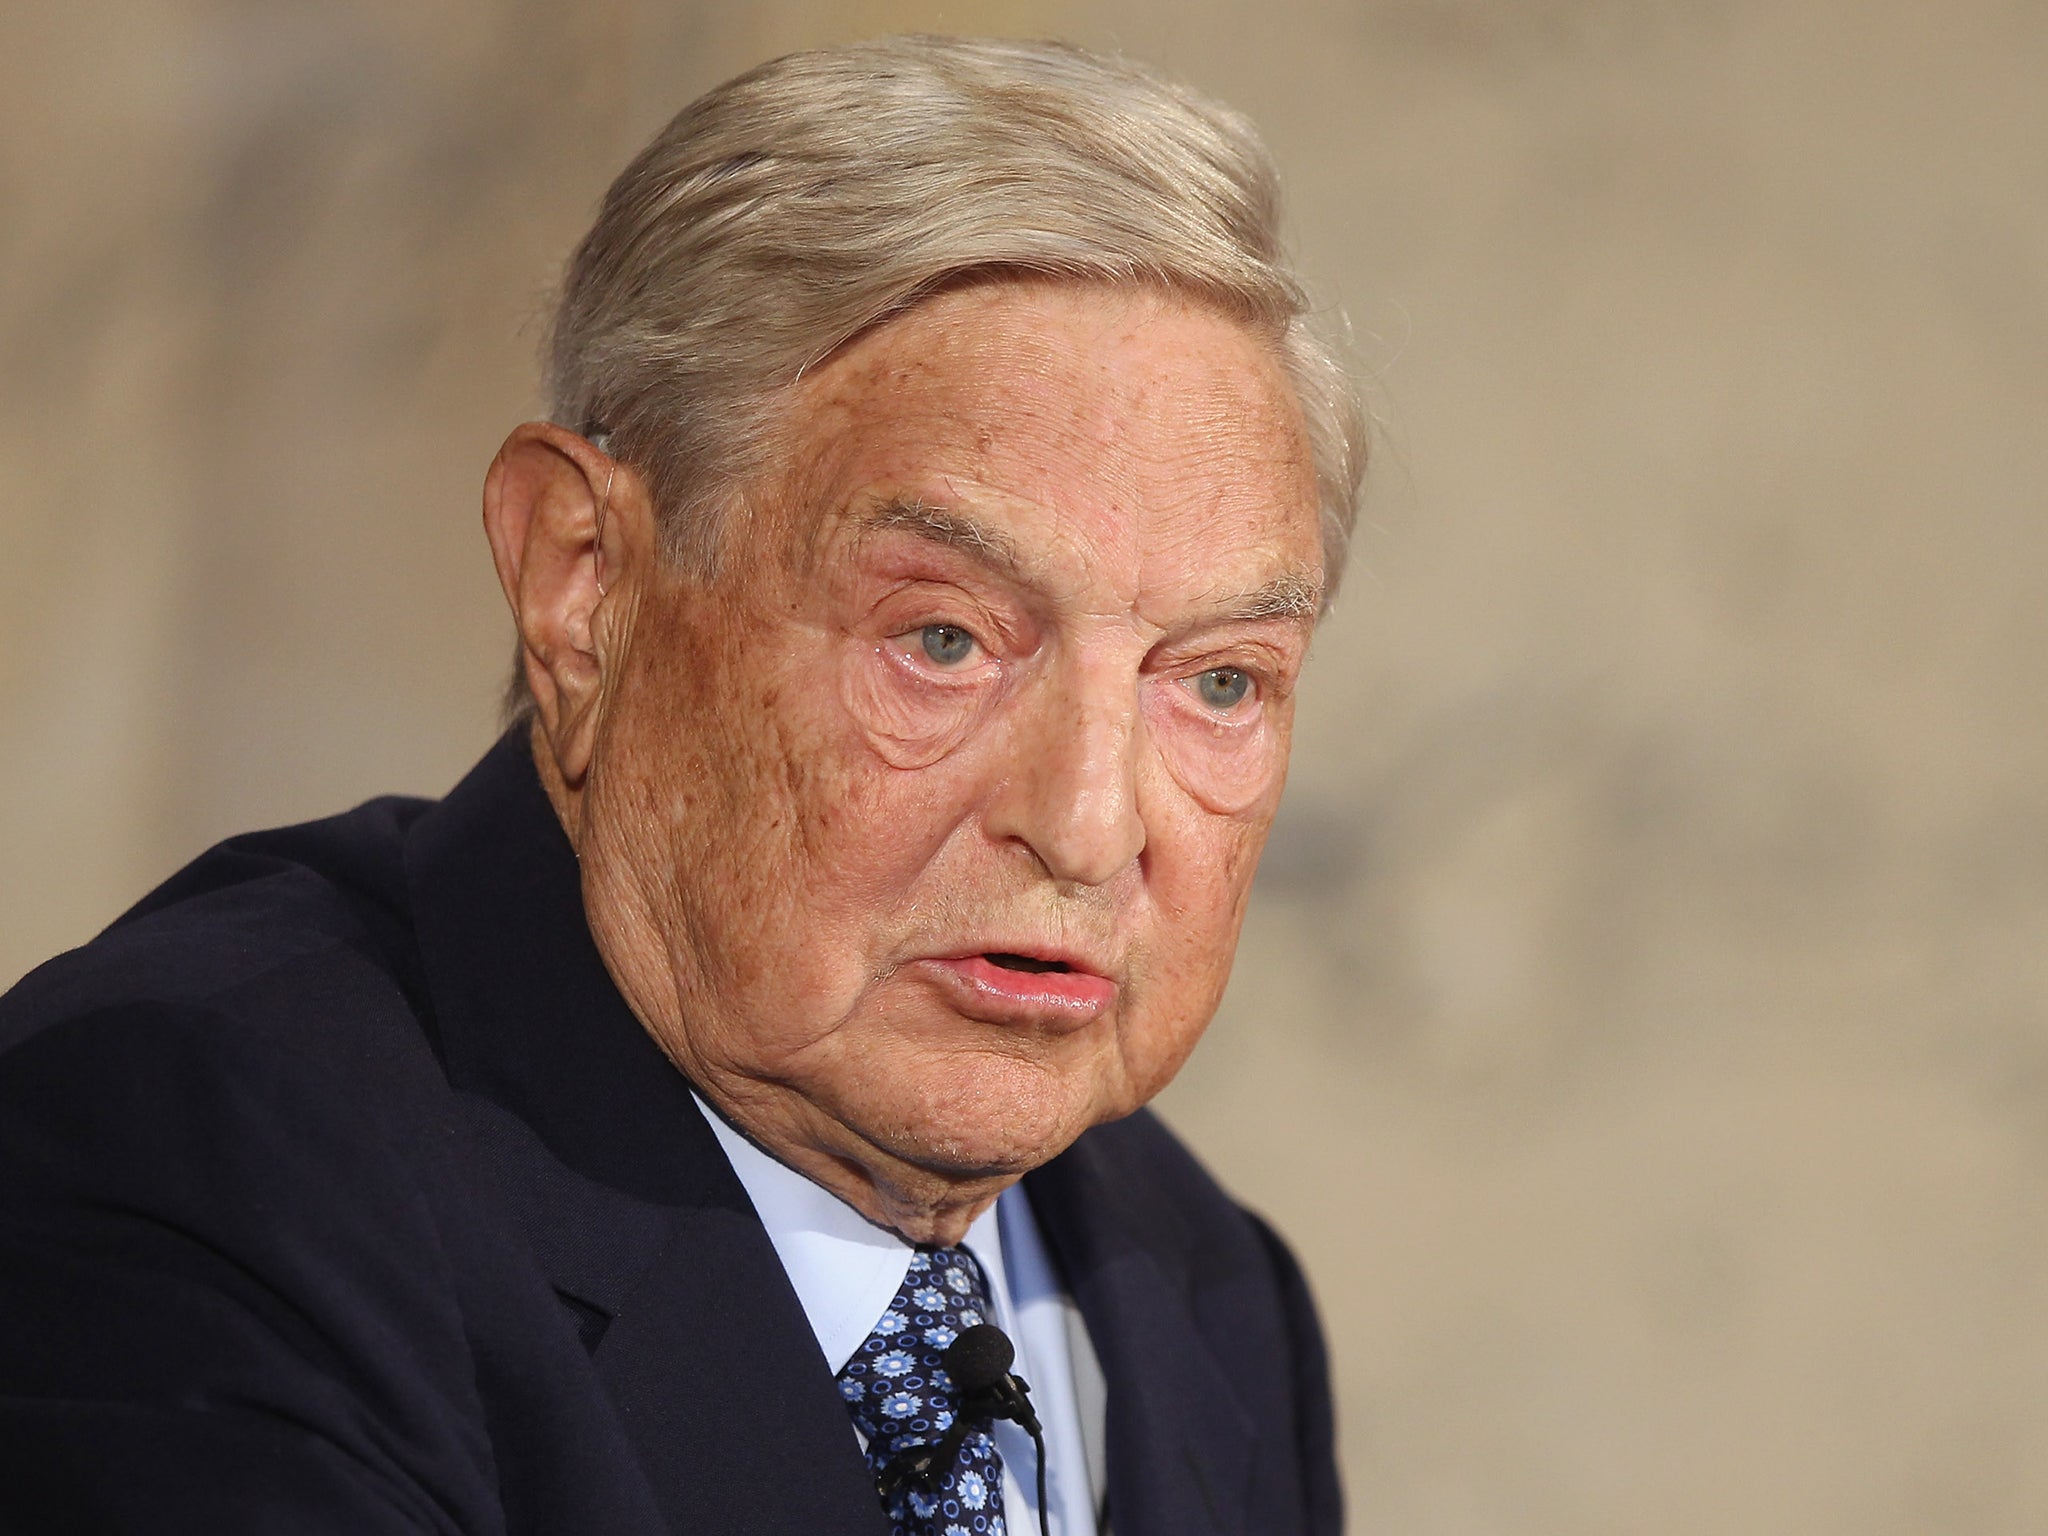 Budapest has accused Mr Soros and the liberal groups he supports of trying to destroy Europe’s Christian culture by promoting mass migration - a charge he denies